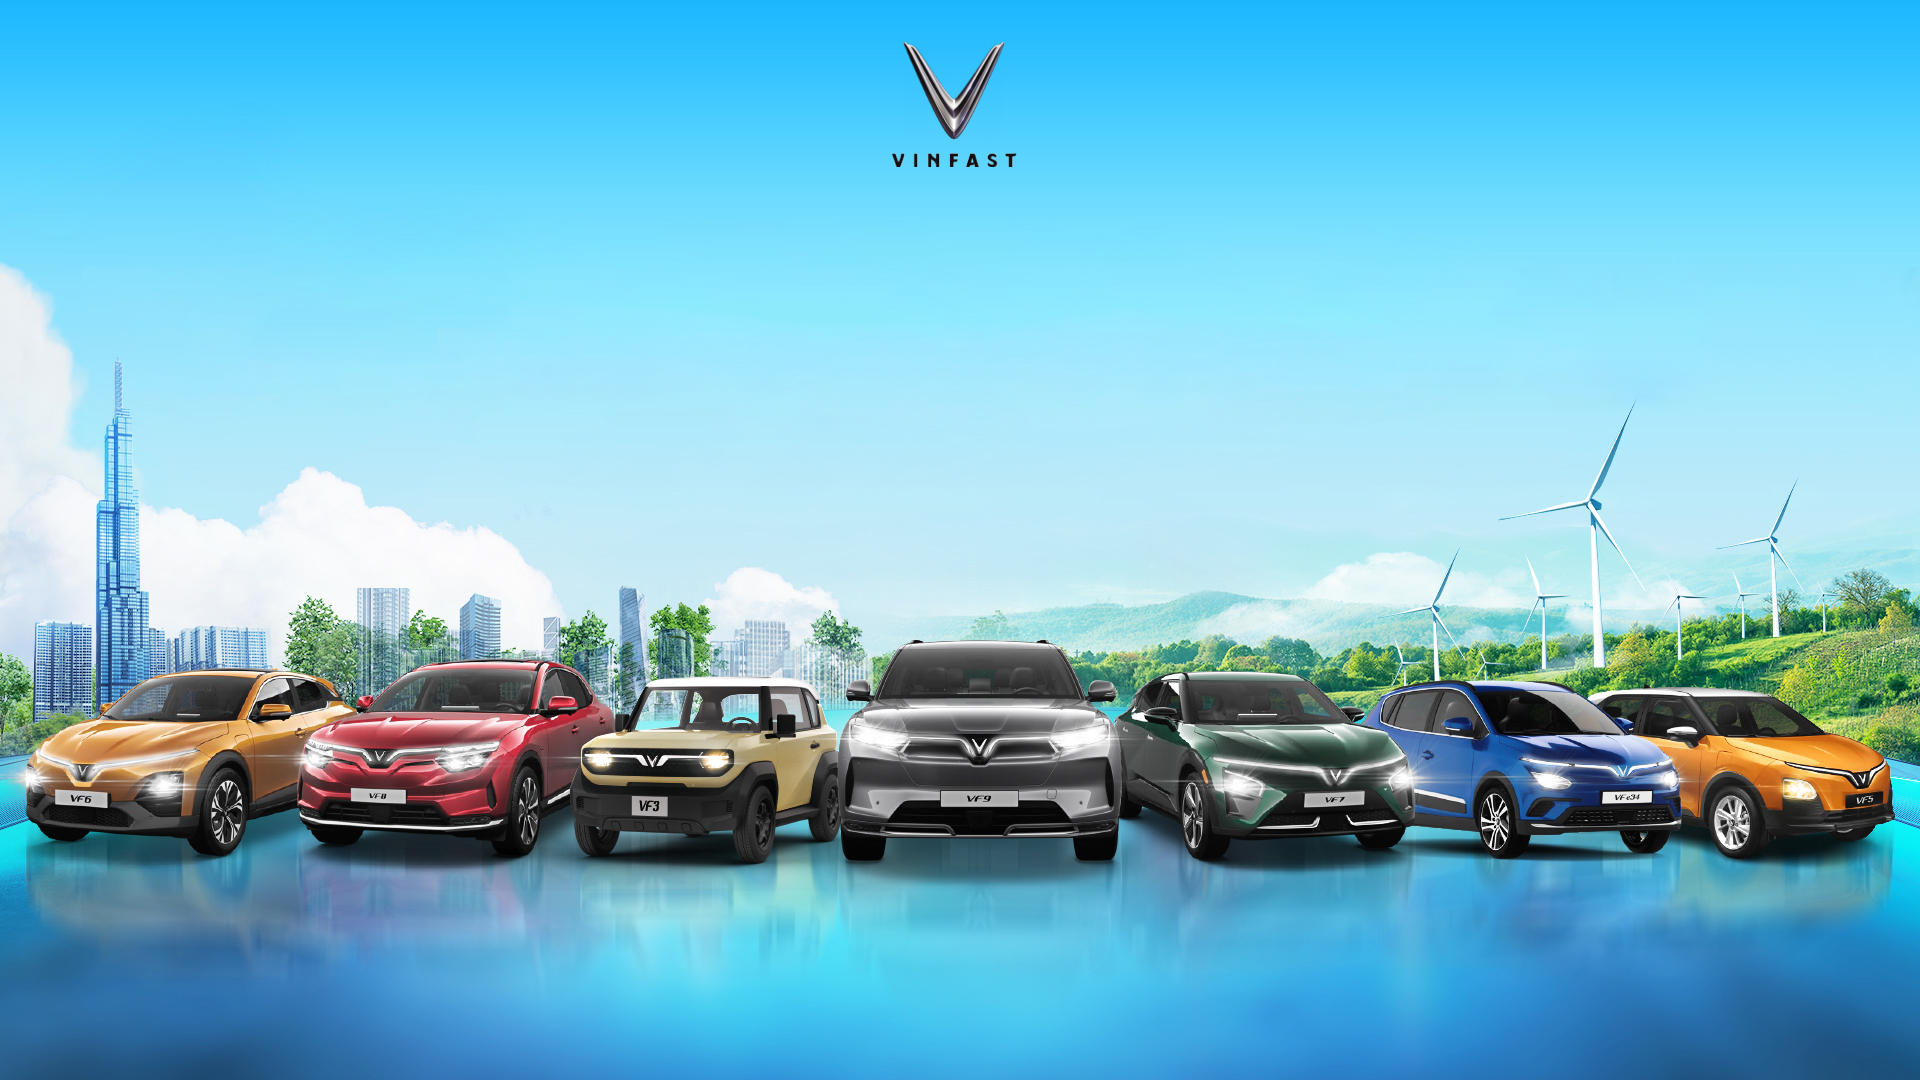 VINFAST'S "FOR A GREEN FUTURE" EXHIBITION SERIES TO SHOWCASE ITS COMPREHENSIVE ELECTRIC MOBILITY ECOSYSTEM IN VIETNAM